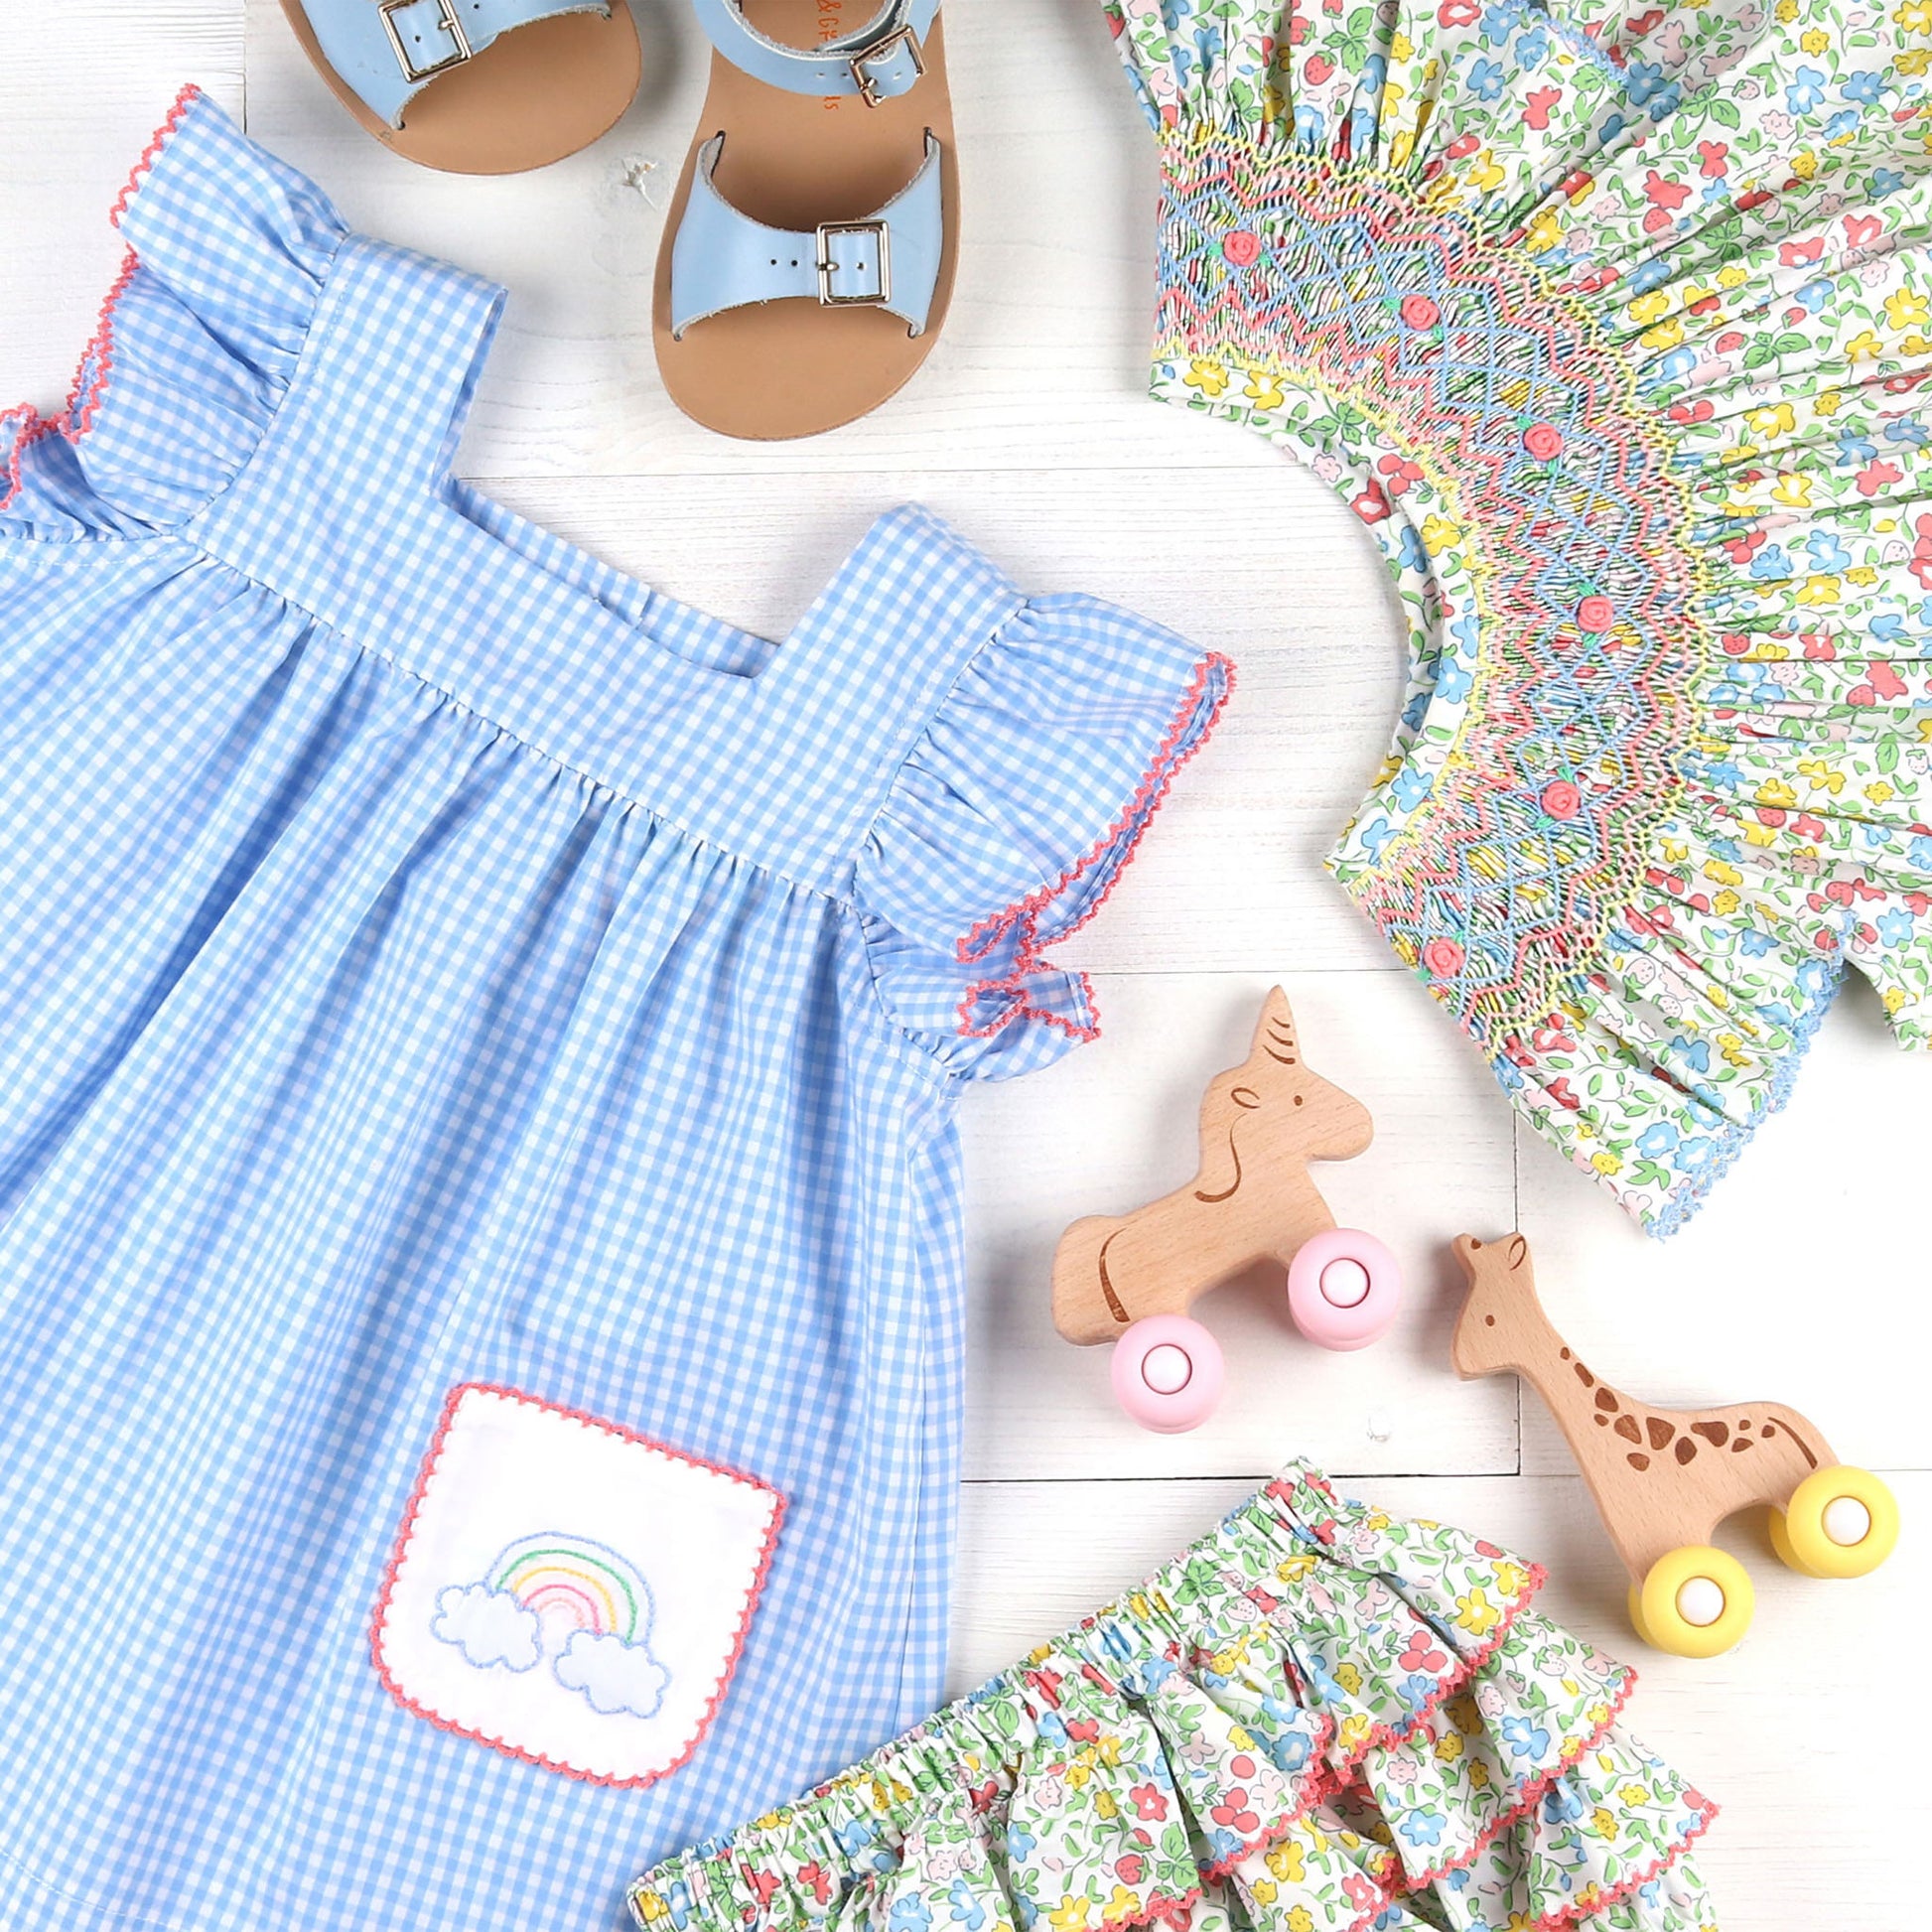 Sunny Rainbow Embroidered Set flatlay with a dress, bloomers, sandals and wooden unicorn and giraffe toys